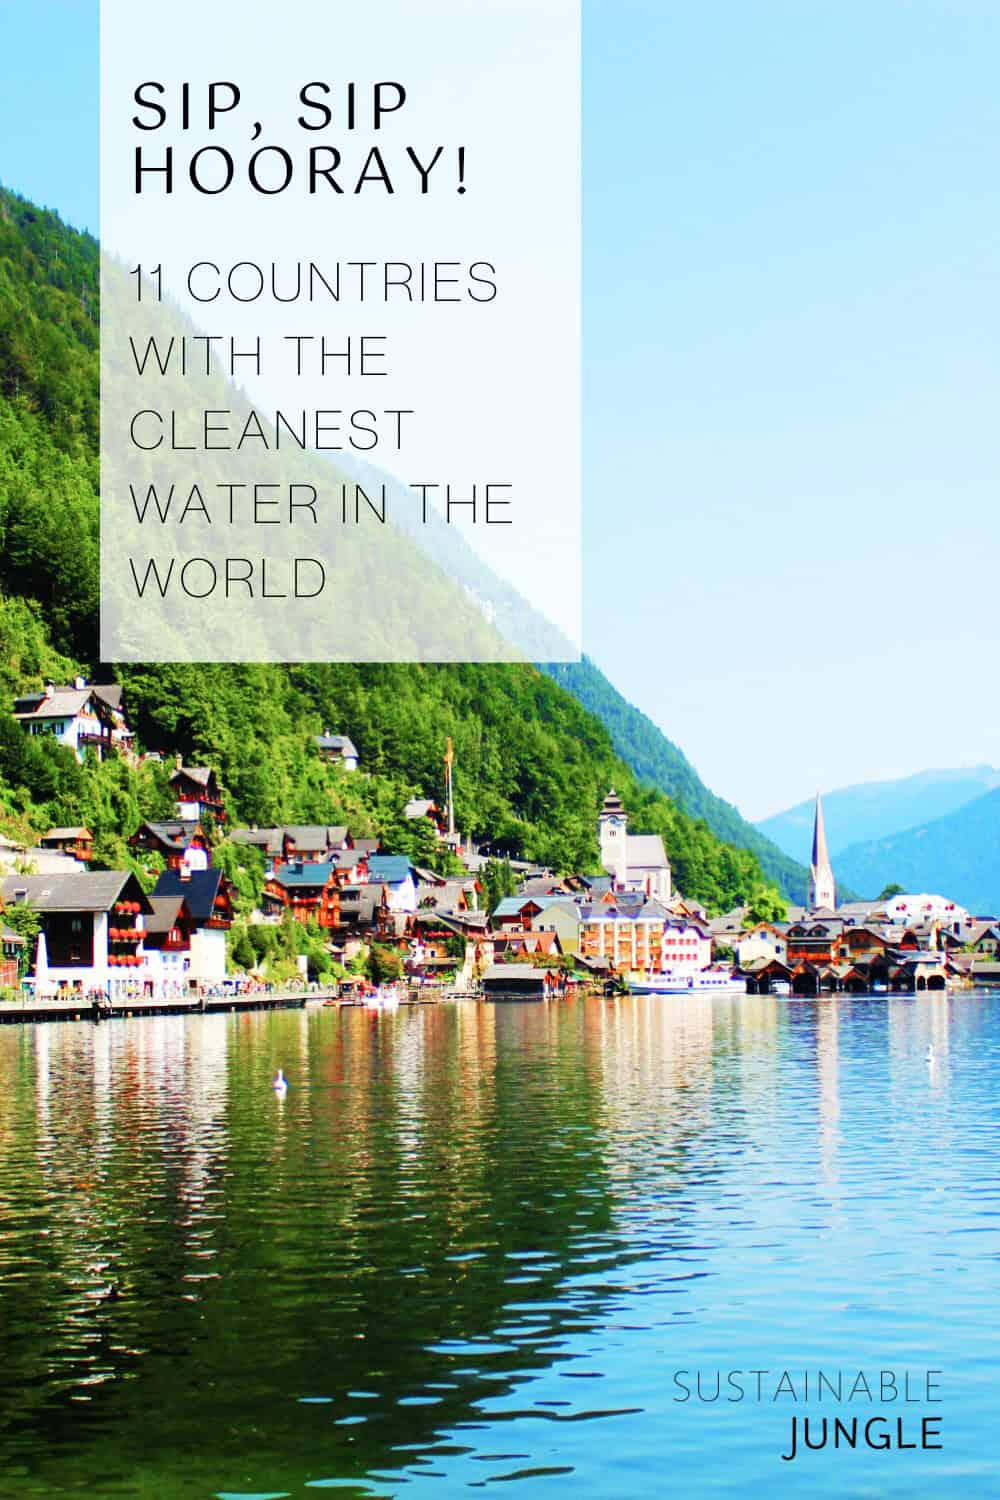 Sip, Sip Hooray: 11 Countries With The Cleanest Water In The World Image by Sustainable Jungle #cleanestwaterintheworld #bestwaterintheworld #cleanestdrinkingwaterintheworld #countrieswiththecleanestwater #purestwaterintheworld #sustainablejungle